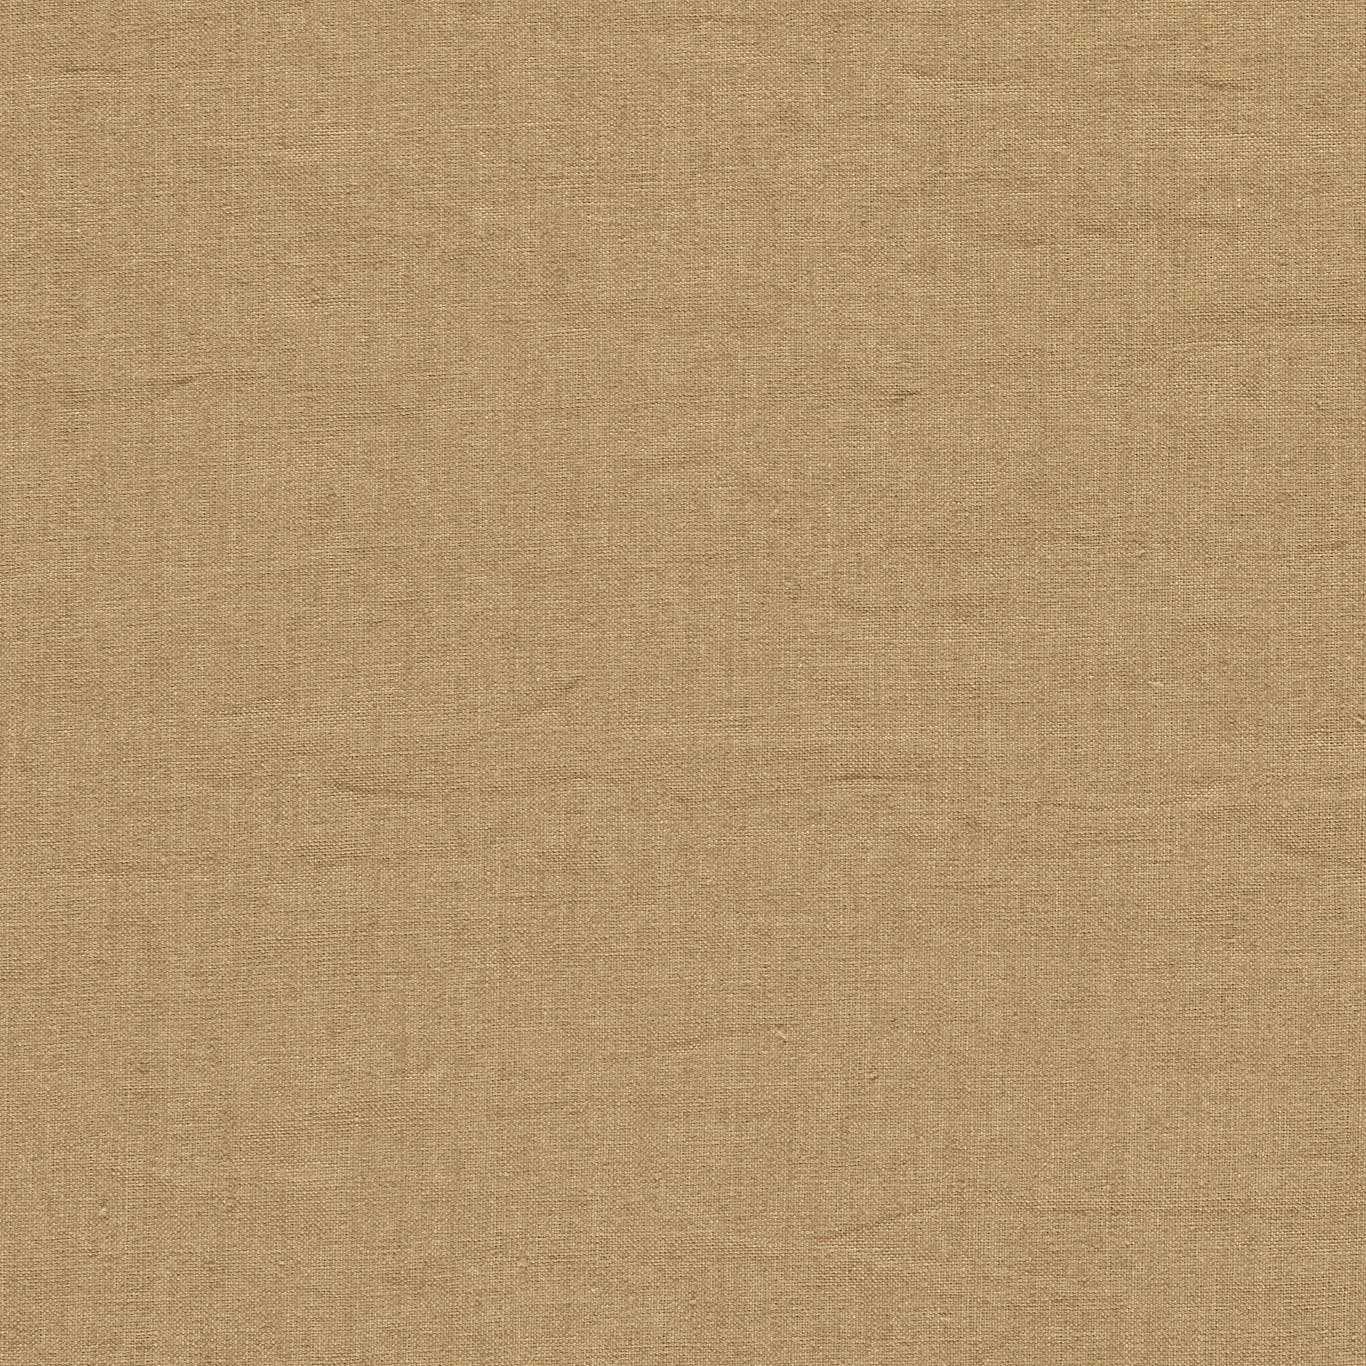 Rue Linen Sepia Fabric by SAN